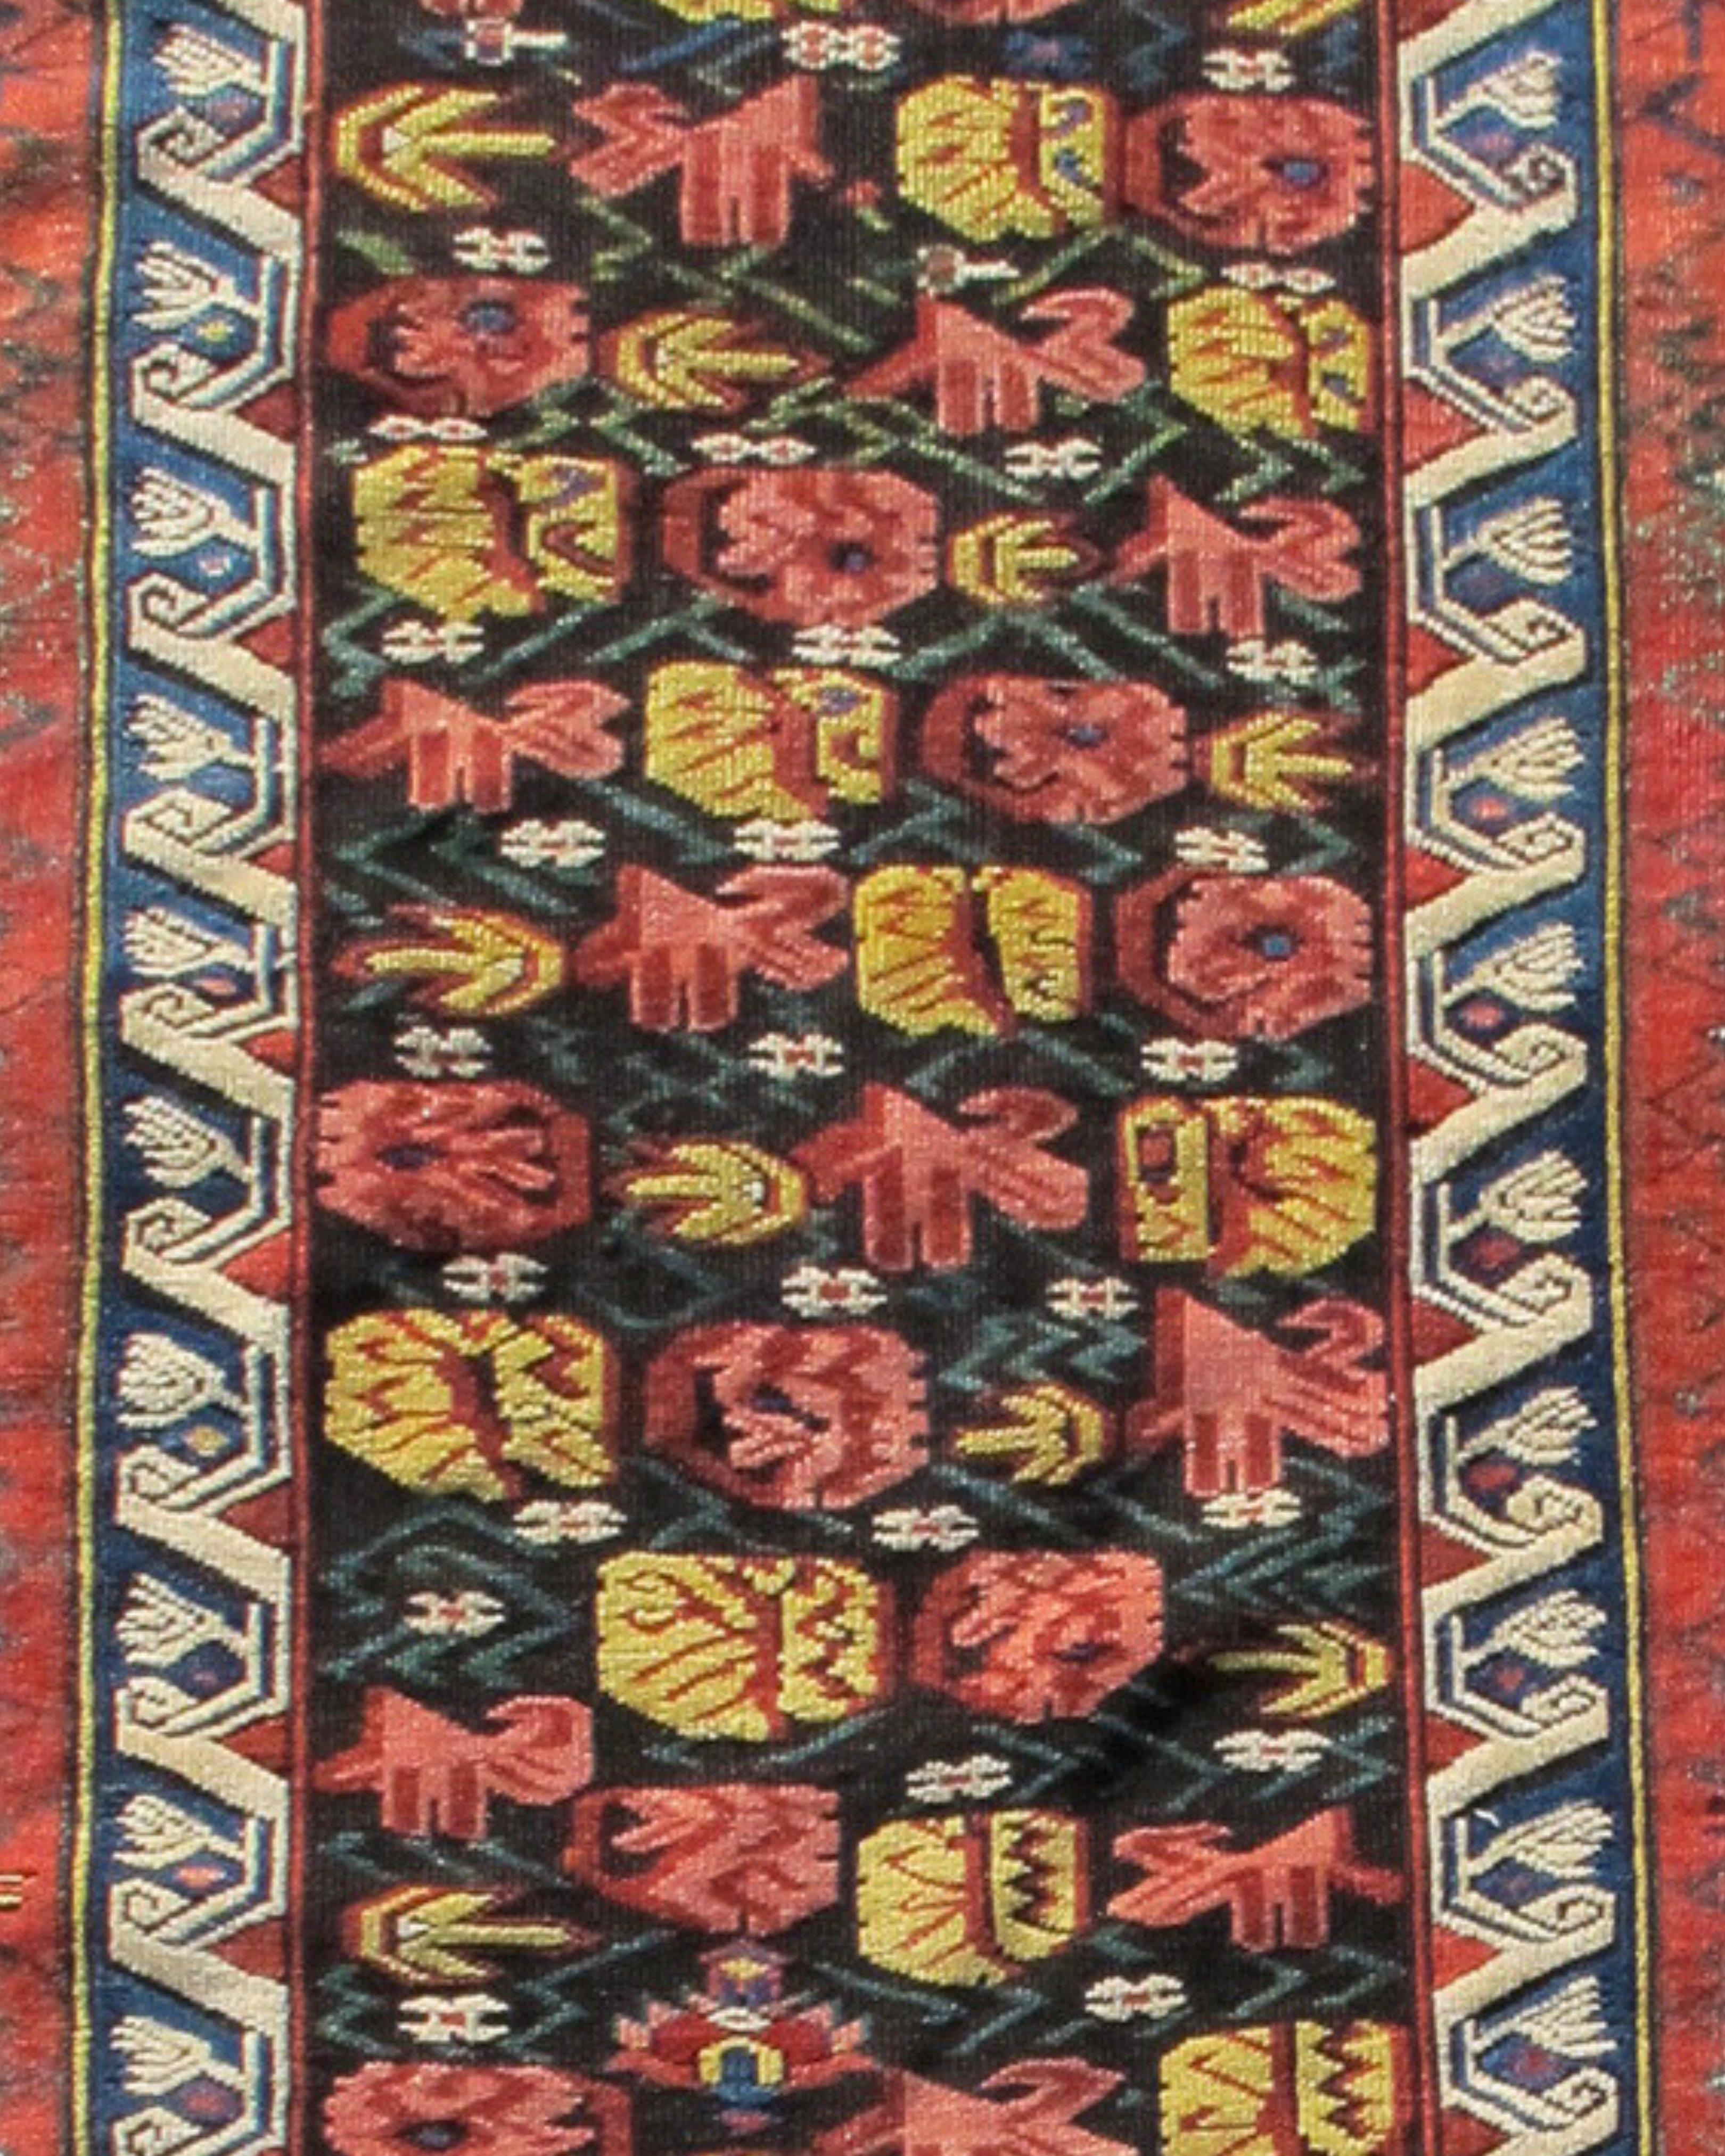 Antique Caucasian Seichor Kuba Rug, Late 19th Century

This colorful Kuba draws a repeat field of stylized flowers and blossoms of the Zeichur type. Vibrant colors such as rose, red and gold, as well as green foliage, are amplified against a deep